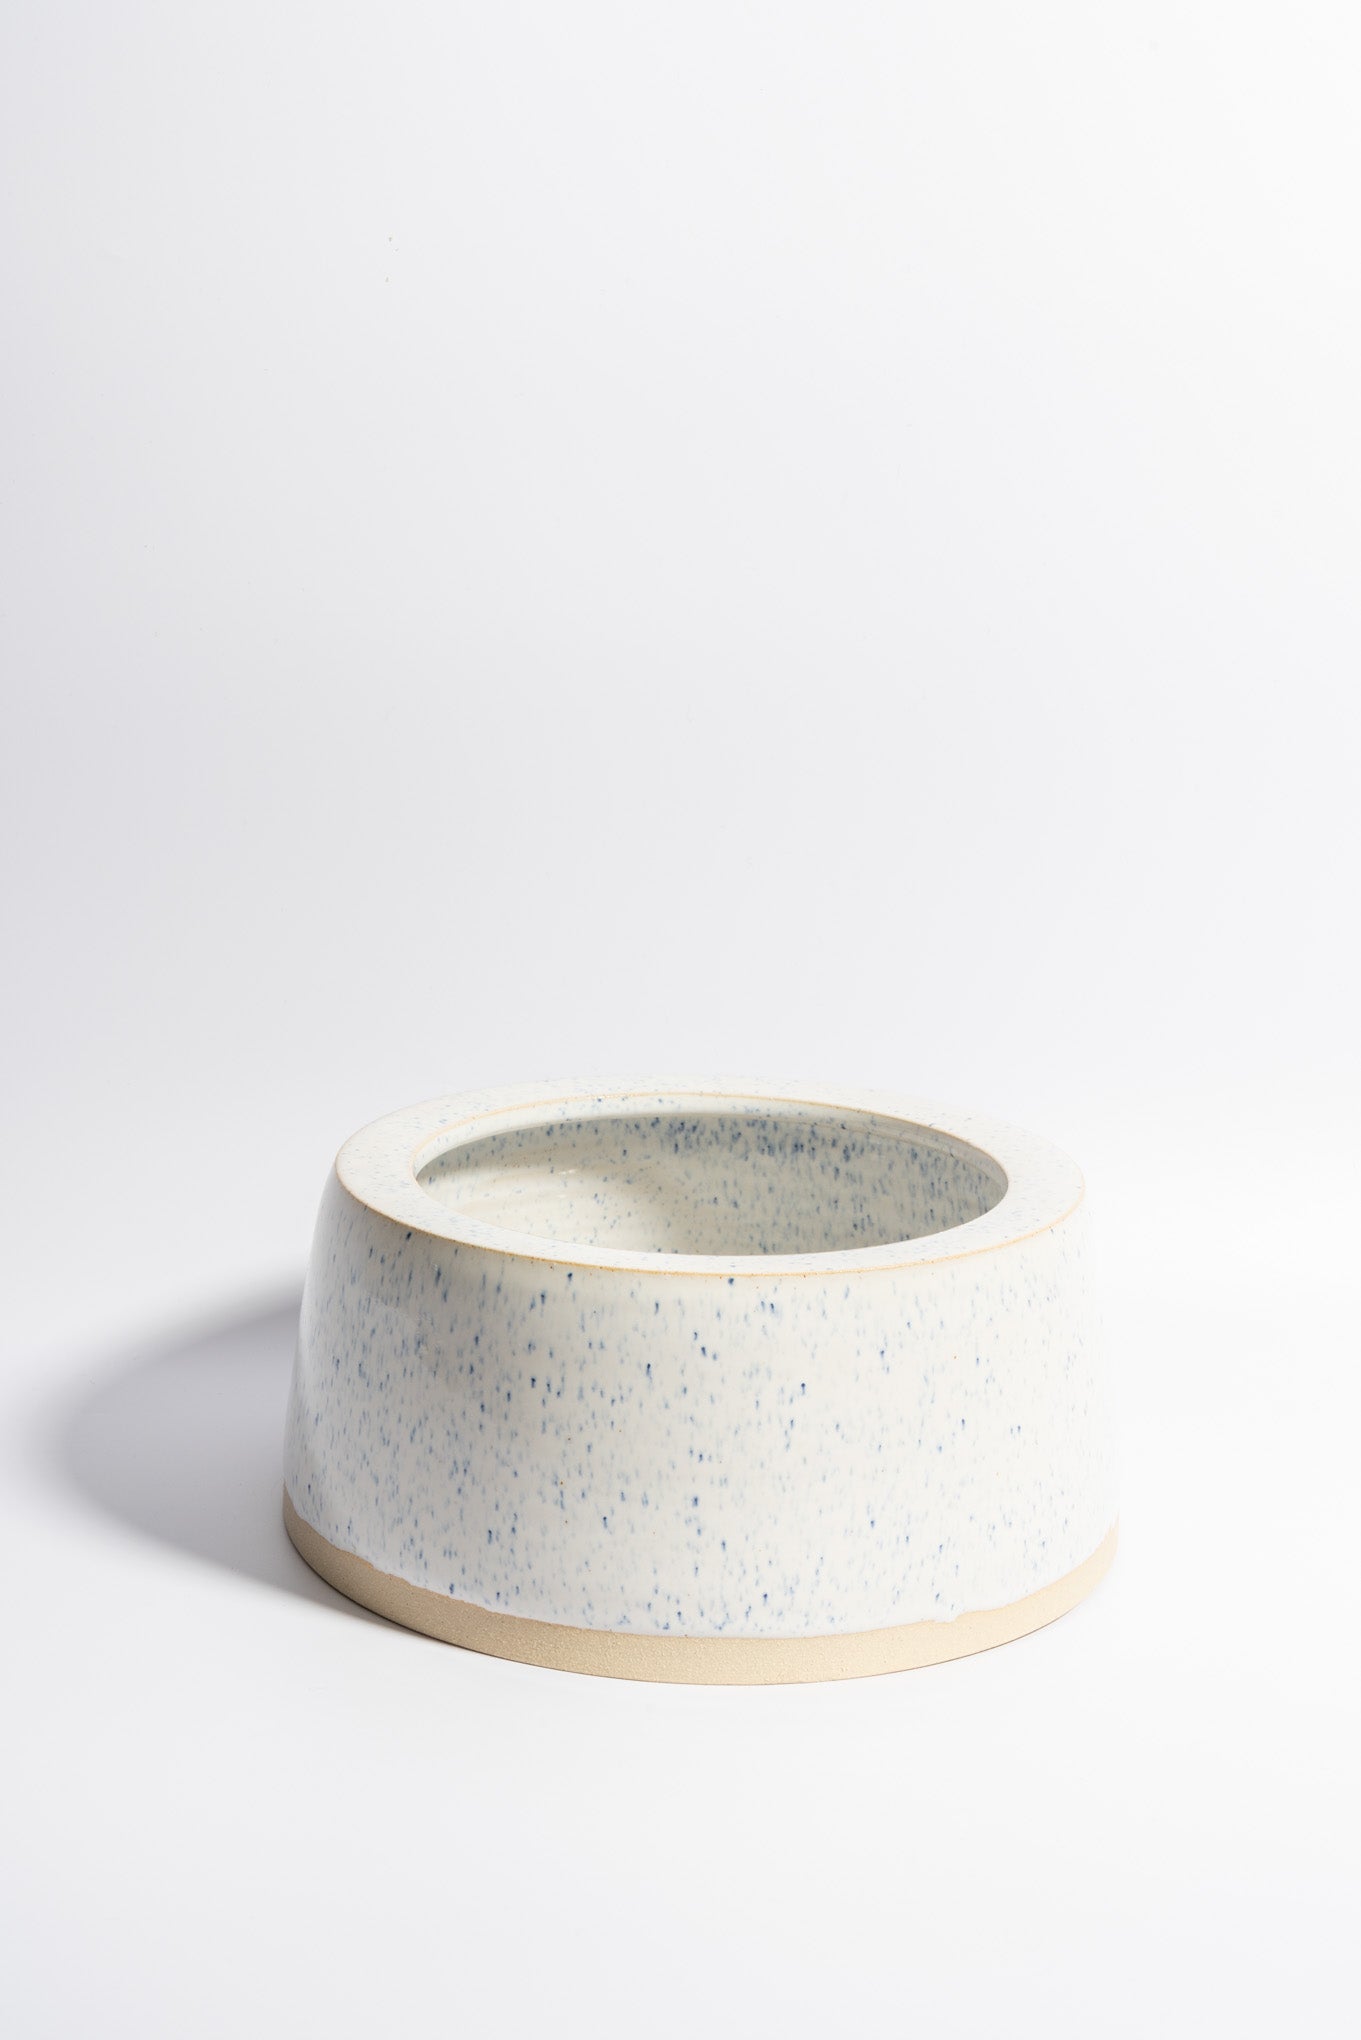 Hand thrown long ears drinking bowl in speckled blue